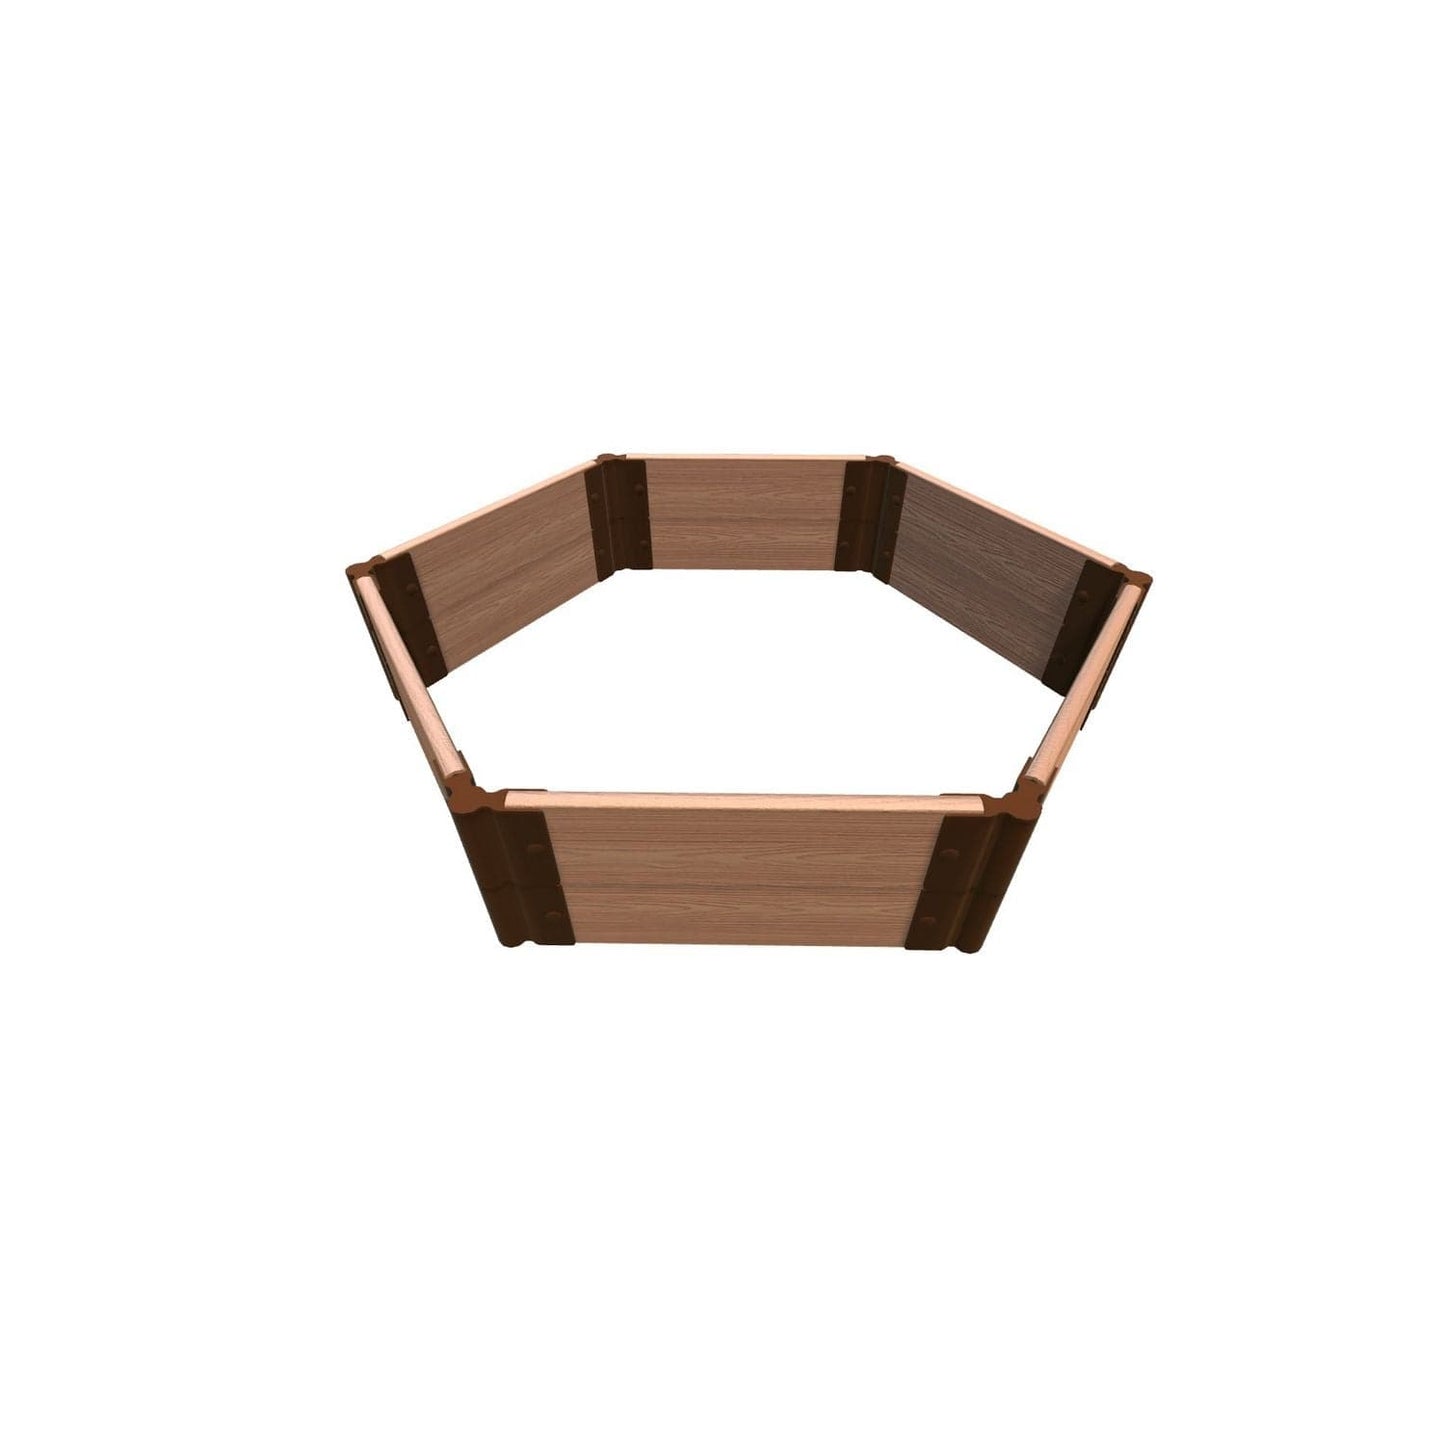 Frame It All Gardening Accessories 1" Frame It All | Tool-Free Fort Jefferson Raised Garden Bed (Hexagon) 4' X 4' X 11" - Classic Sienna 200002467